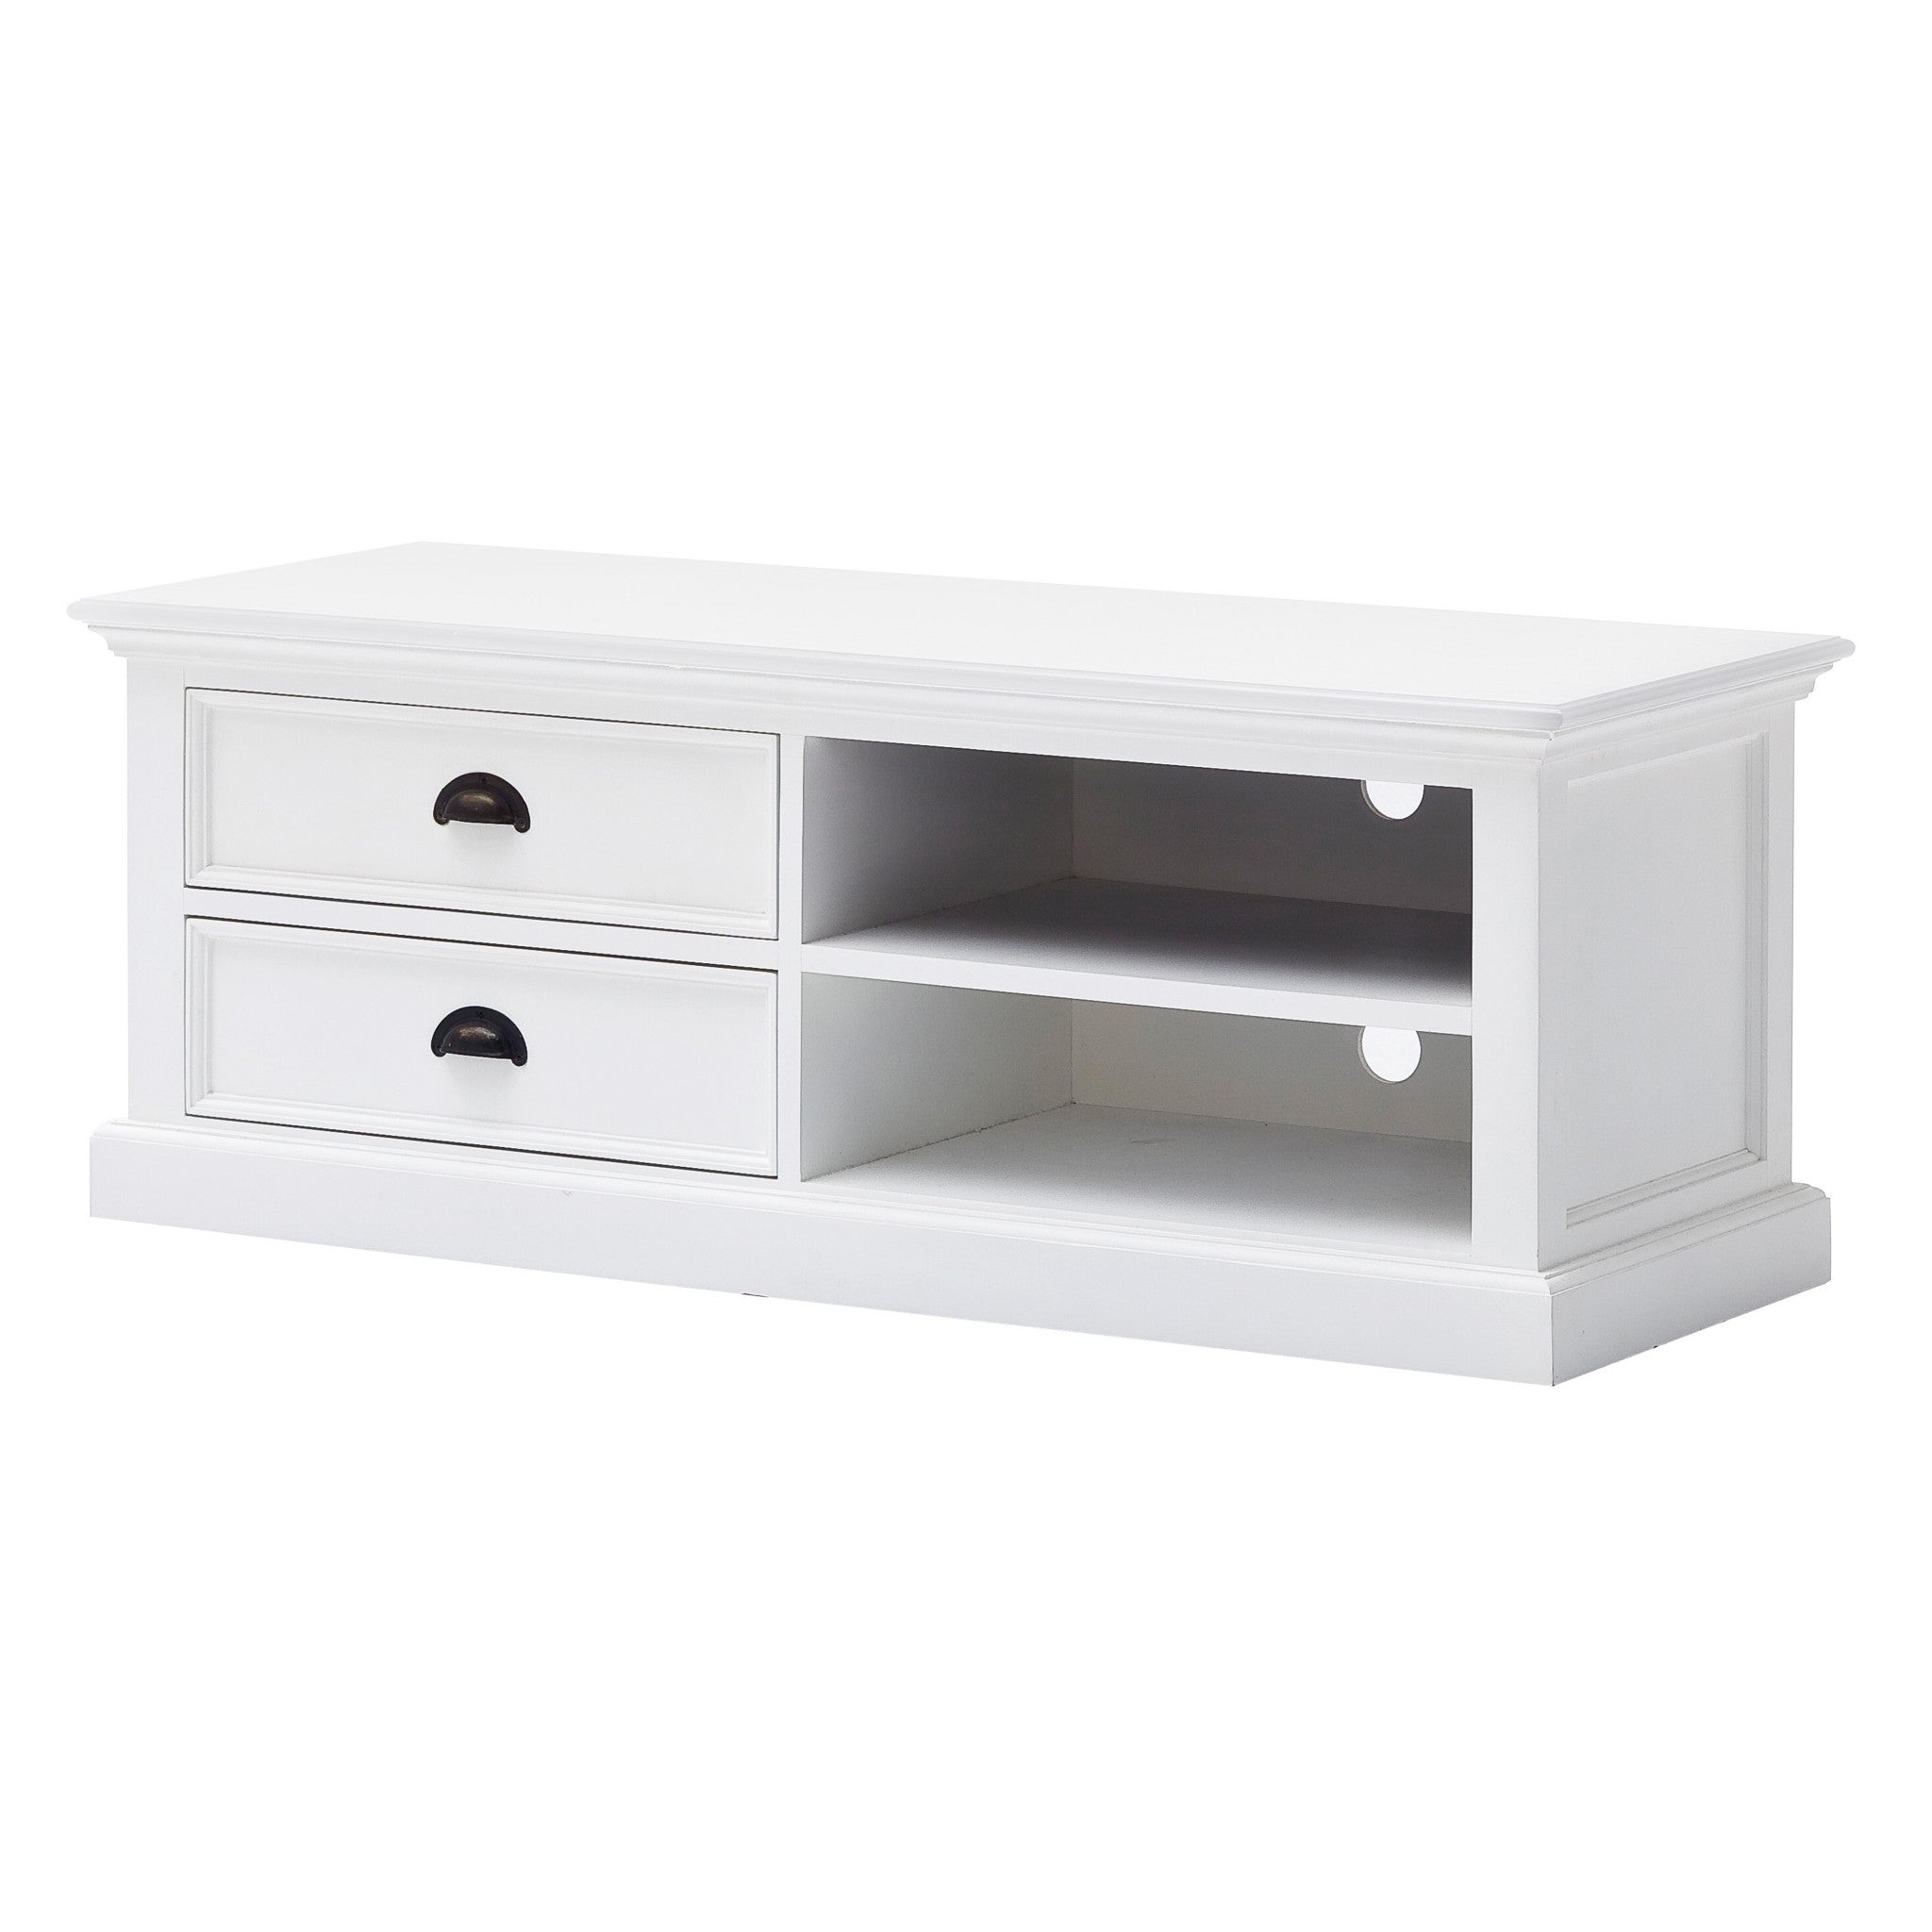 47" White Solid Wood Drawers and Open Shelving Entertainment Center